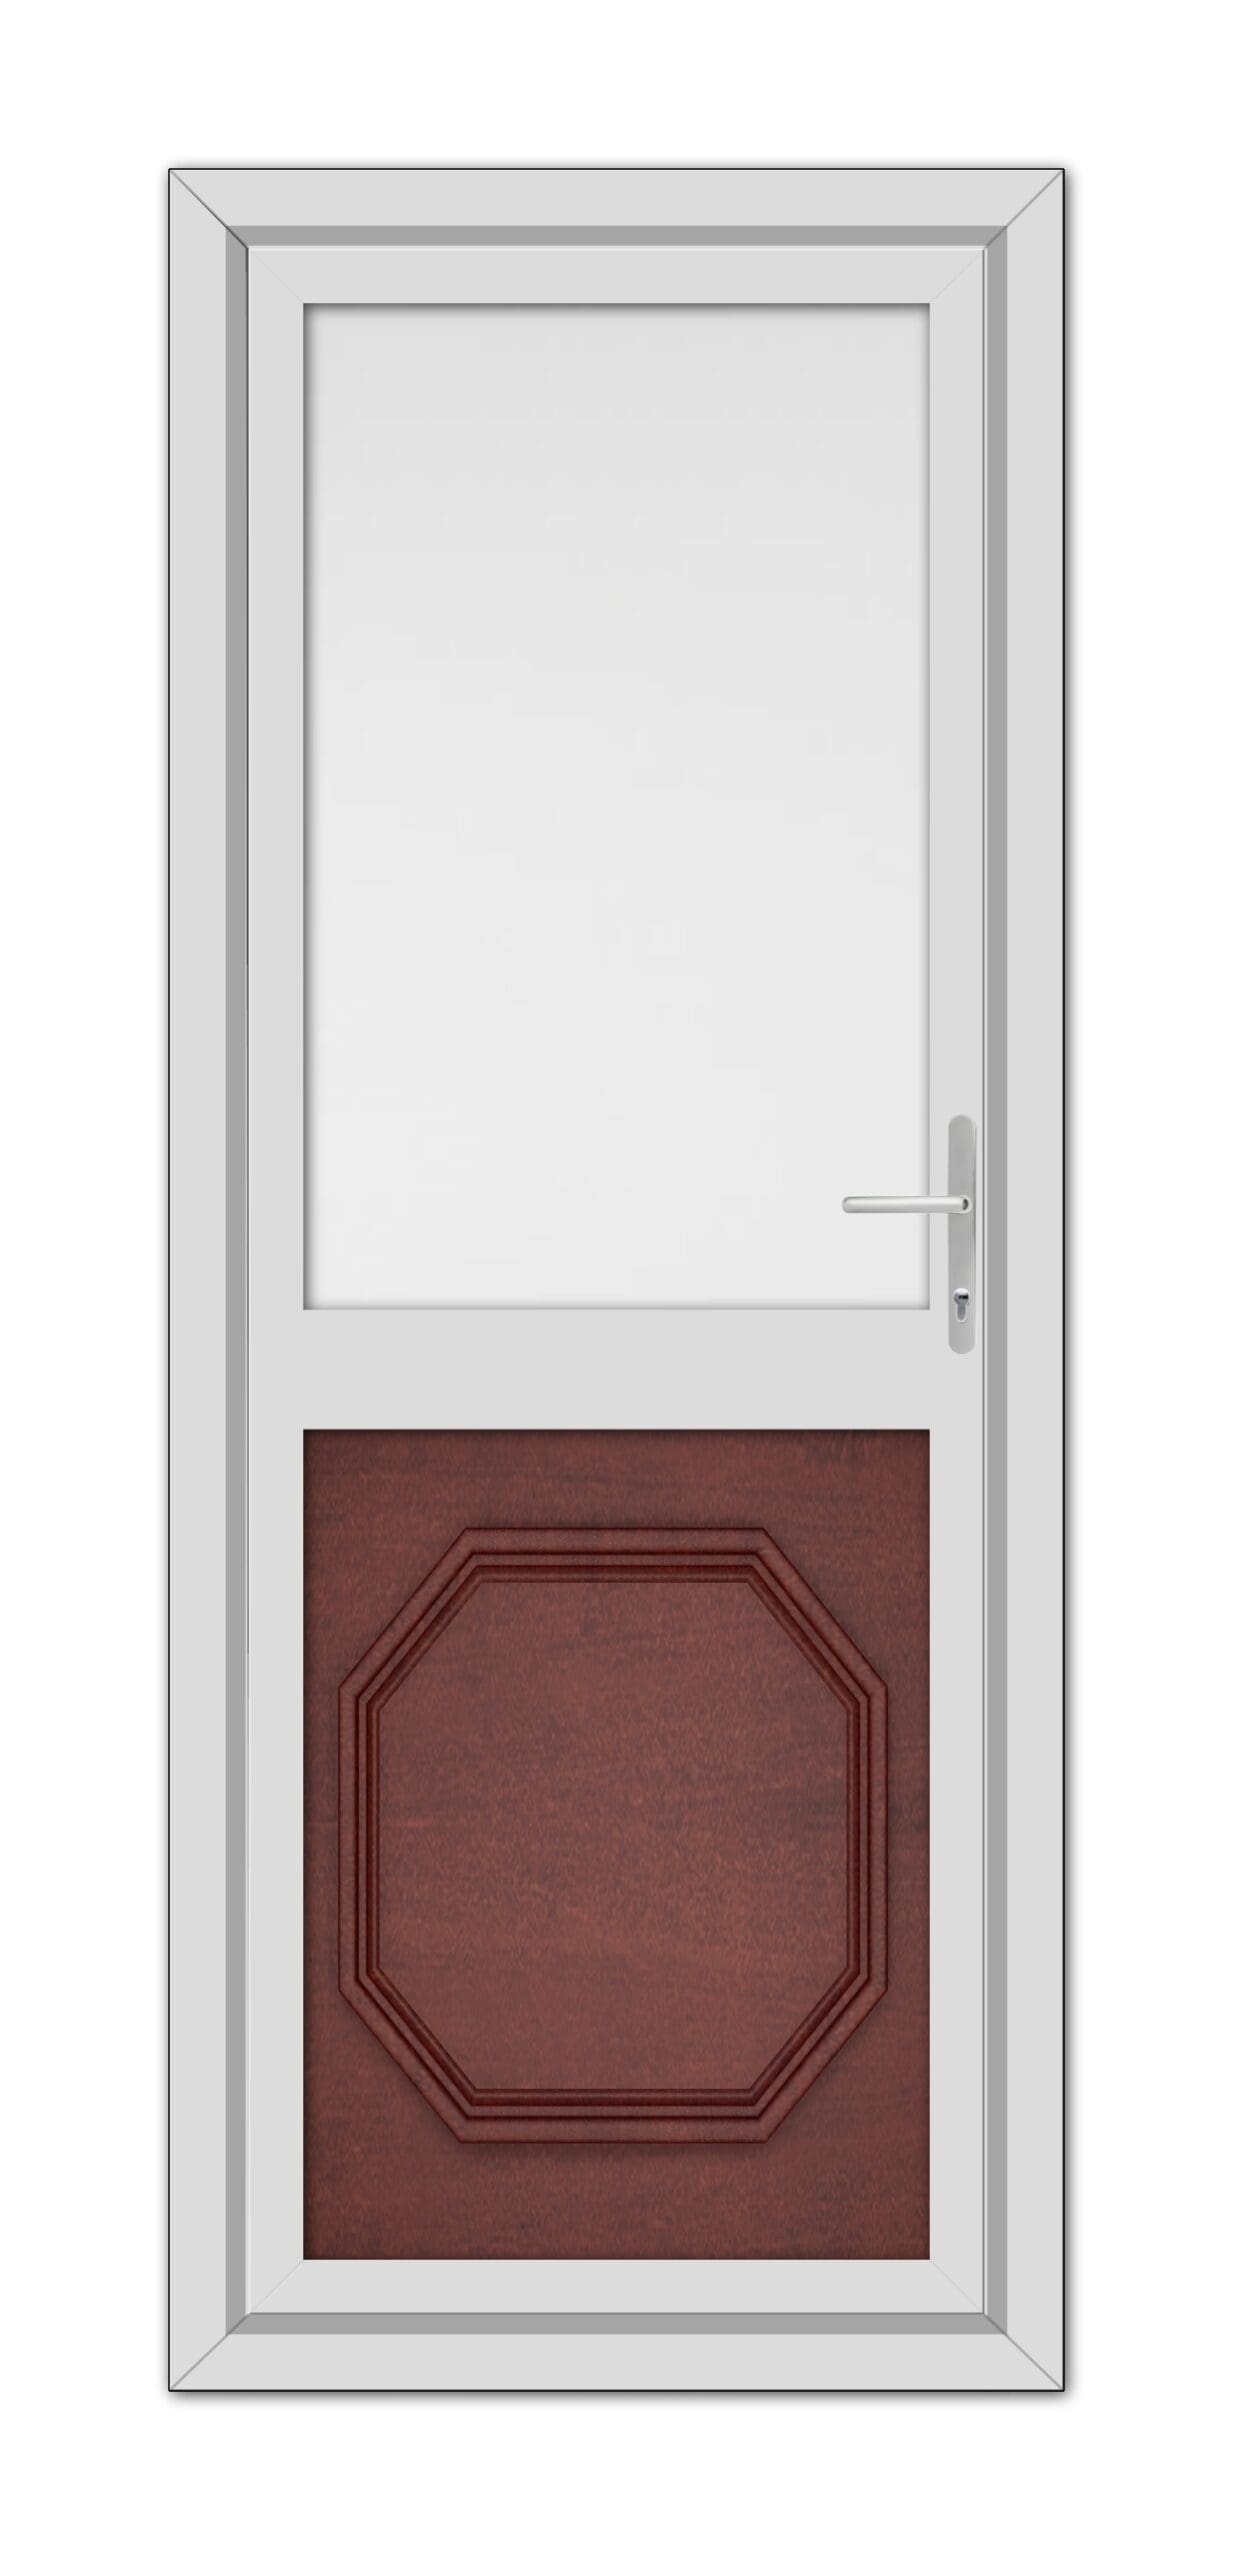 A Mahogan Buckingham Half uPVC Back Door with a white frame, featuring a small upper window and a larger lower octagonal brown panel, equipped with a silver handle.